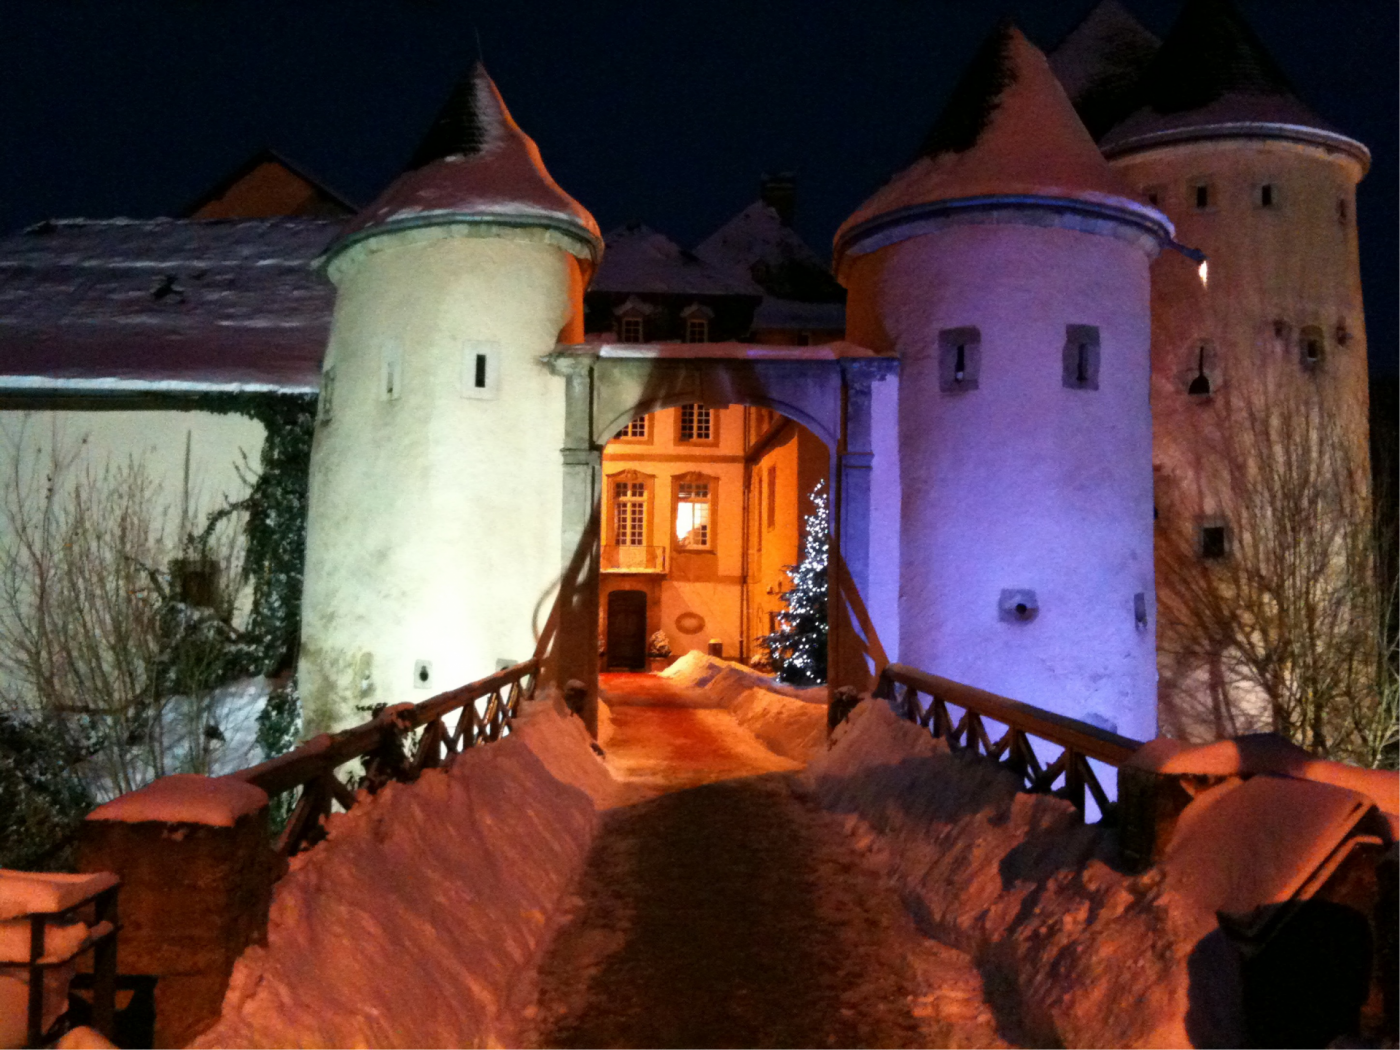 Bourglinster Castle exterior by night